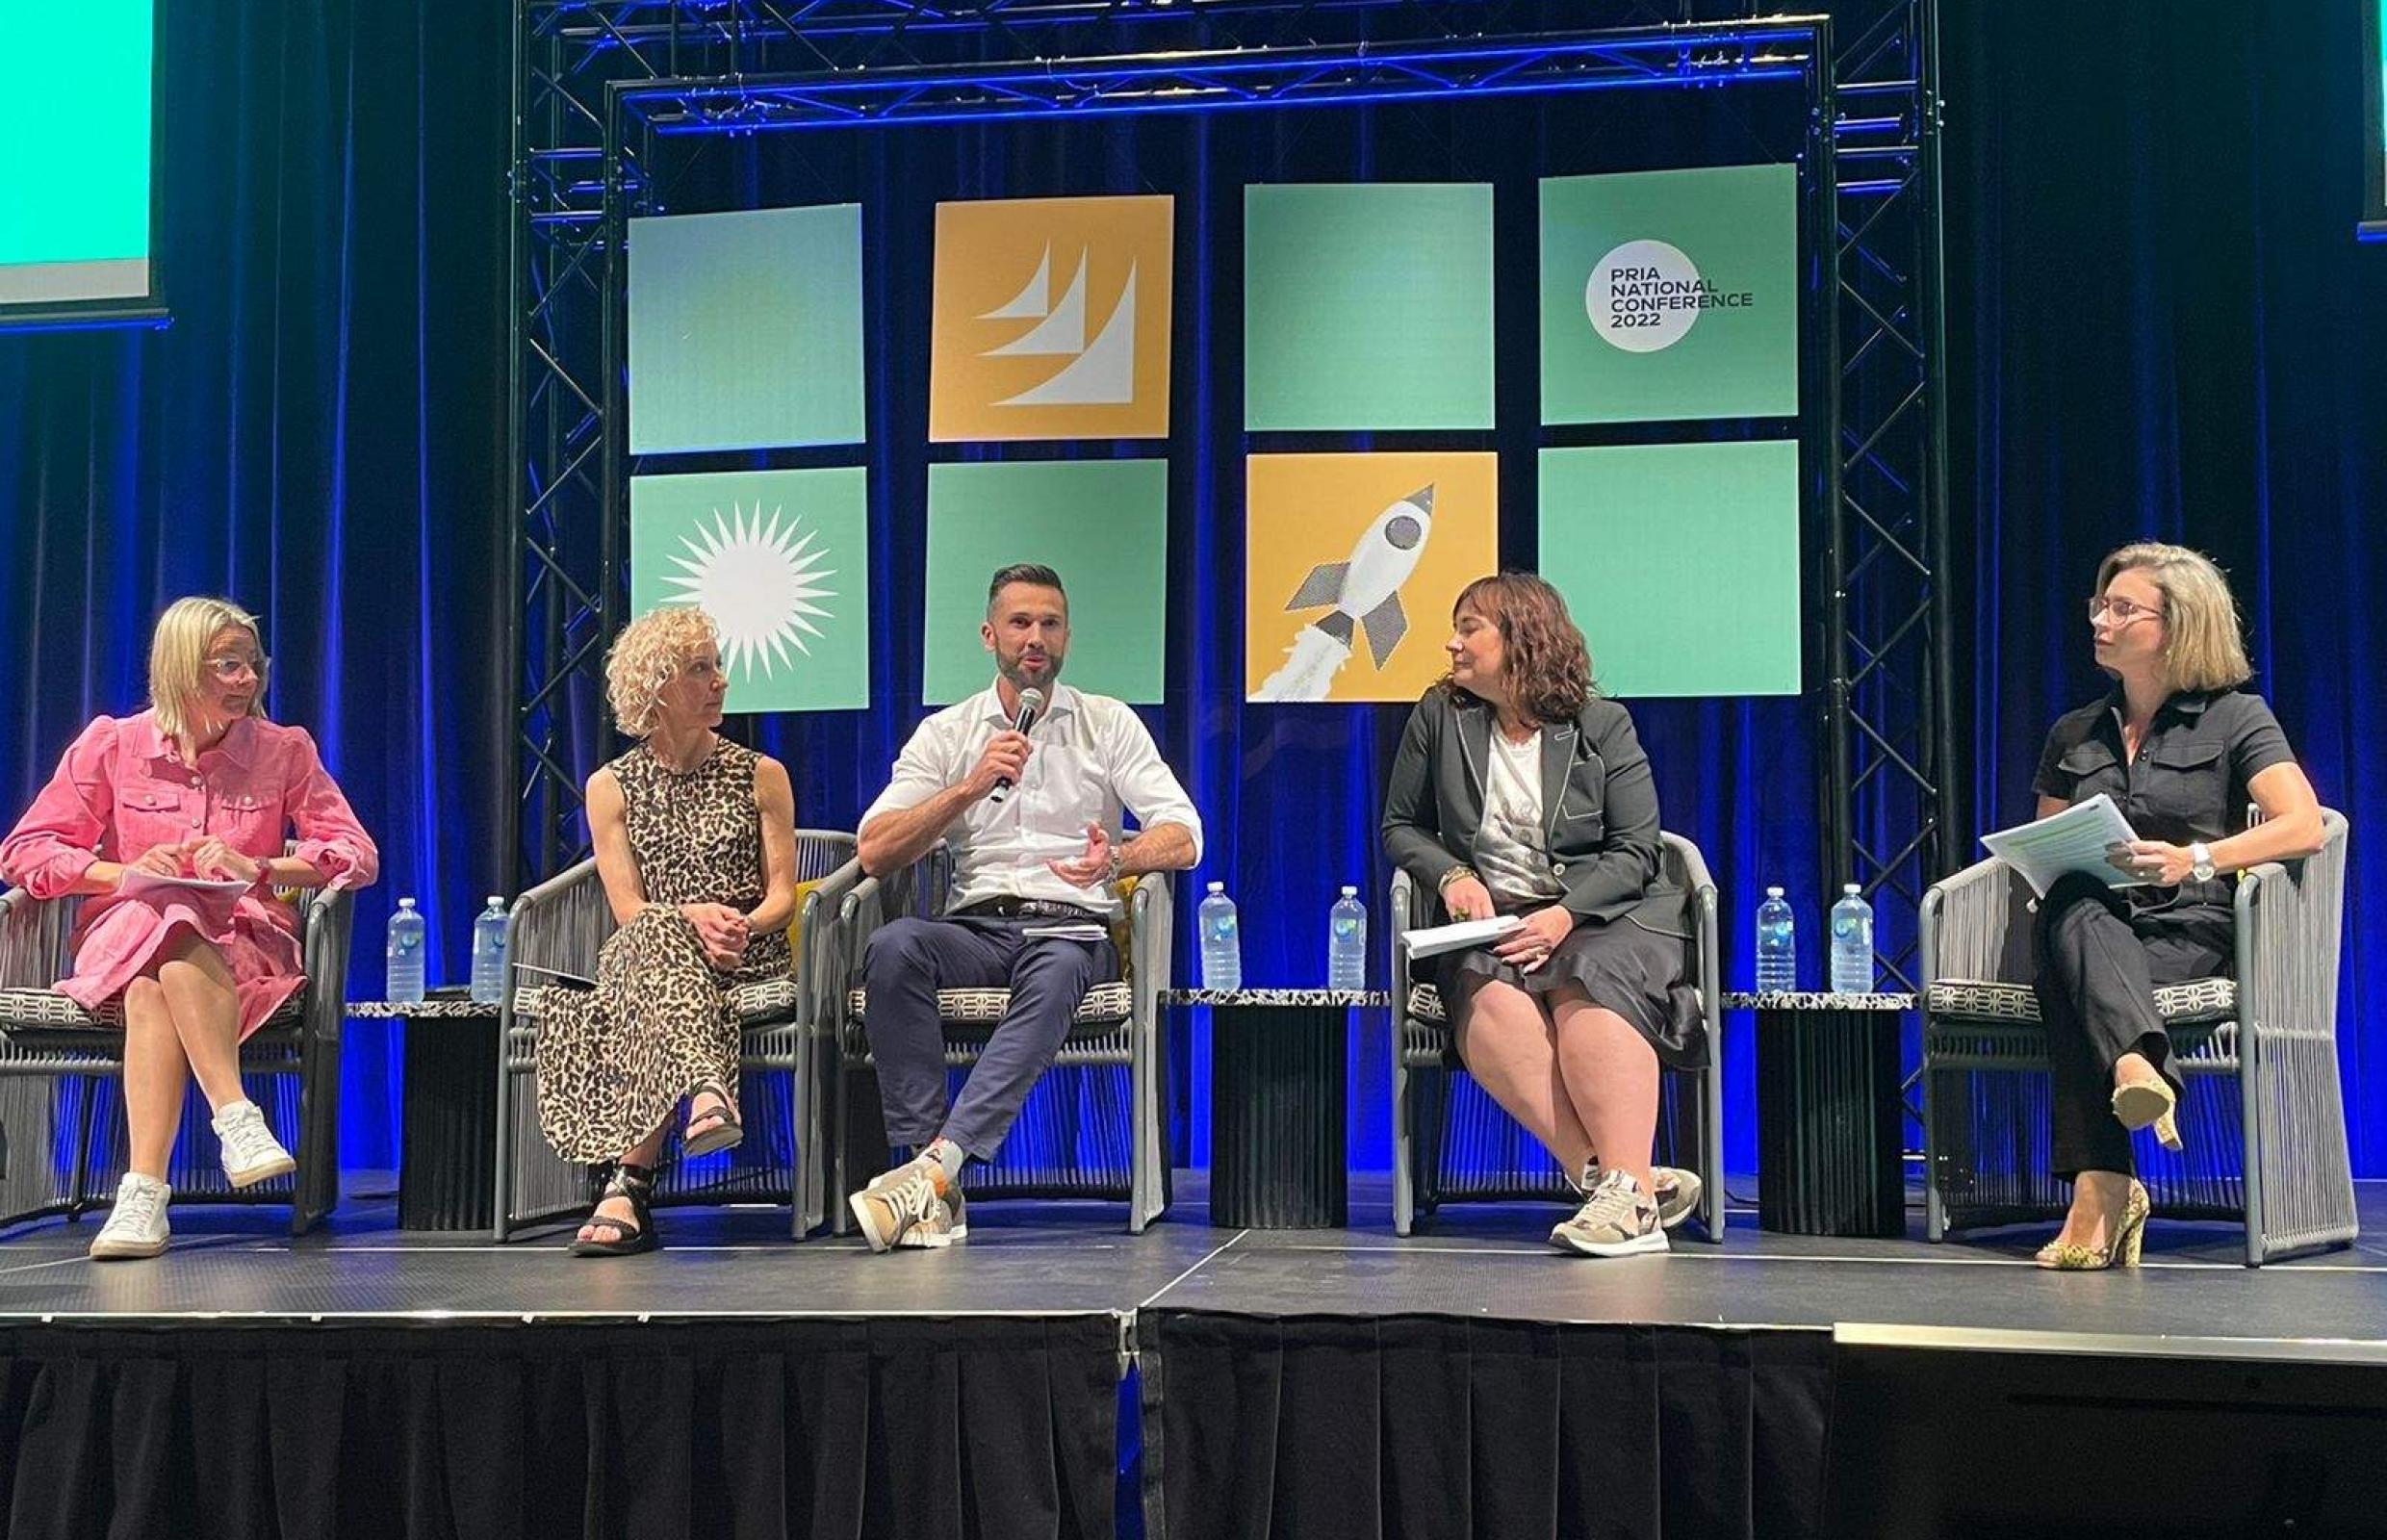 Jen Sharpe at the 2022 PRIA National Conference as part of a panel on Innovating the ways that matter to our clients. From left: Jen, Mandy Galmes from Sefiani, Andy Kelaher from Ogilvy, Michelle Hutton from Edelman and Caroline Catterall from Keep Left